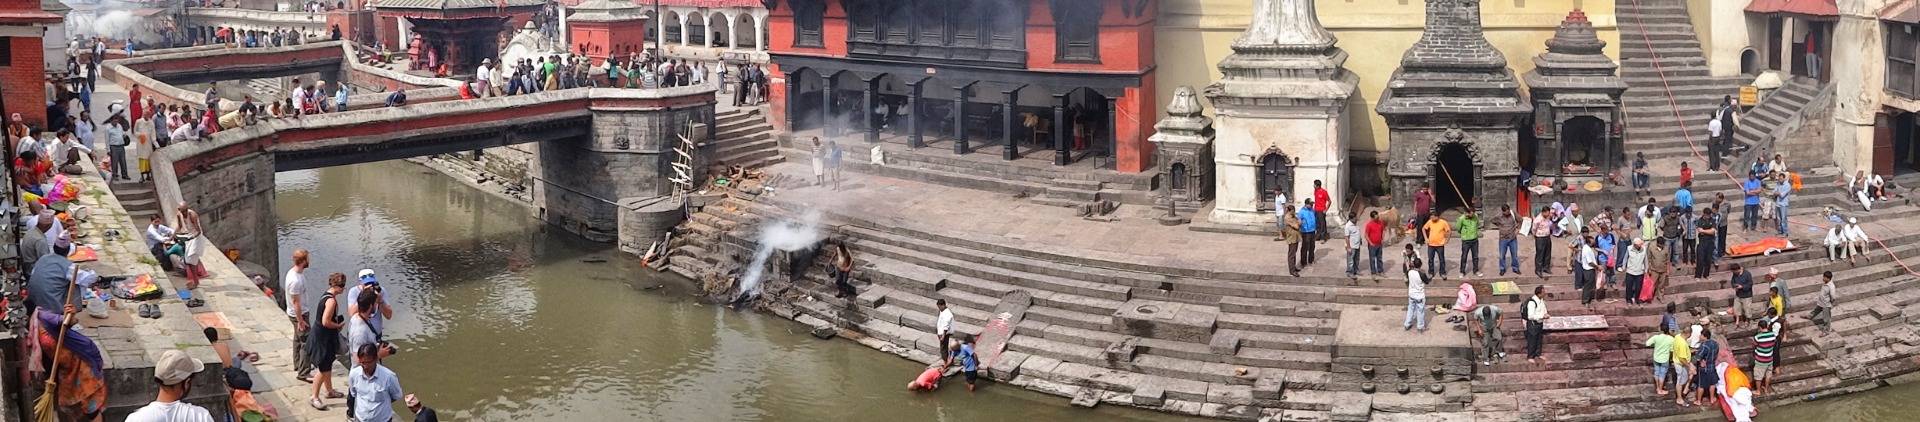 The burning corpses of Pashupatinath: Where the deaths are dust 